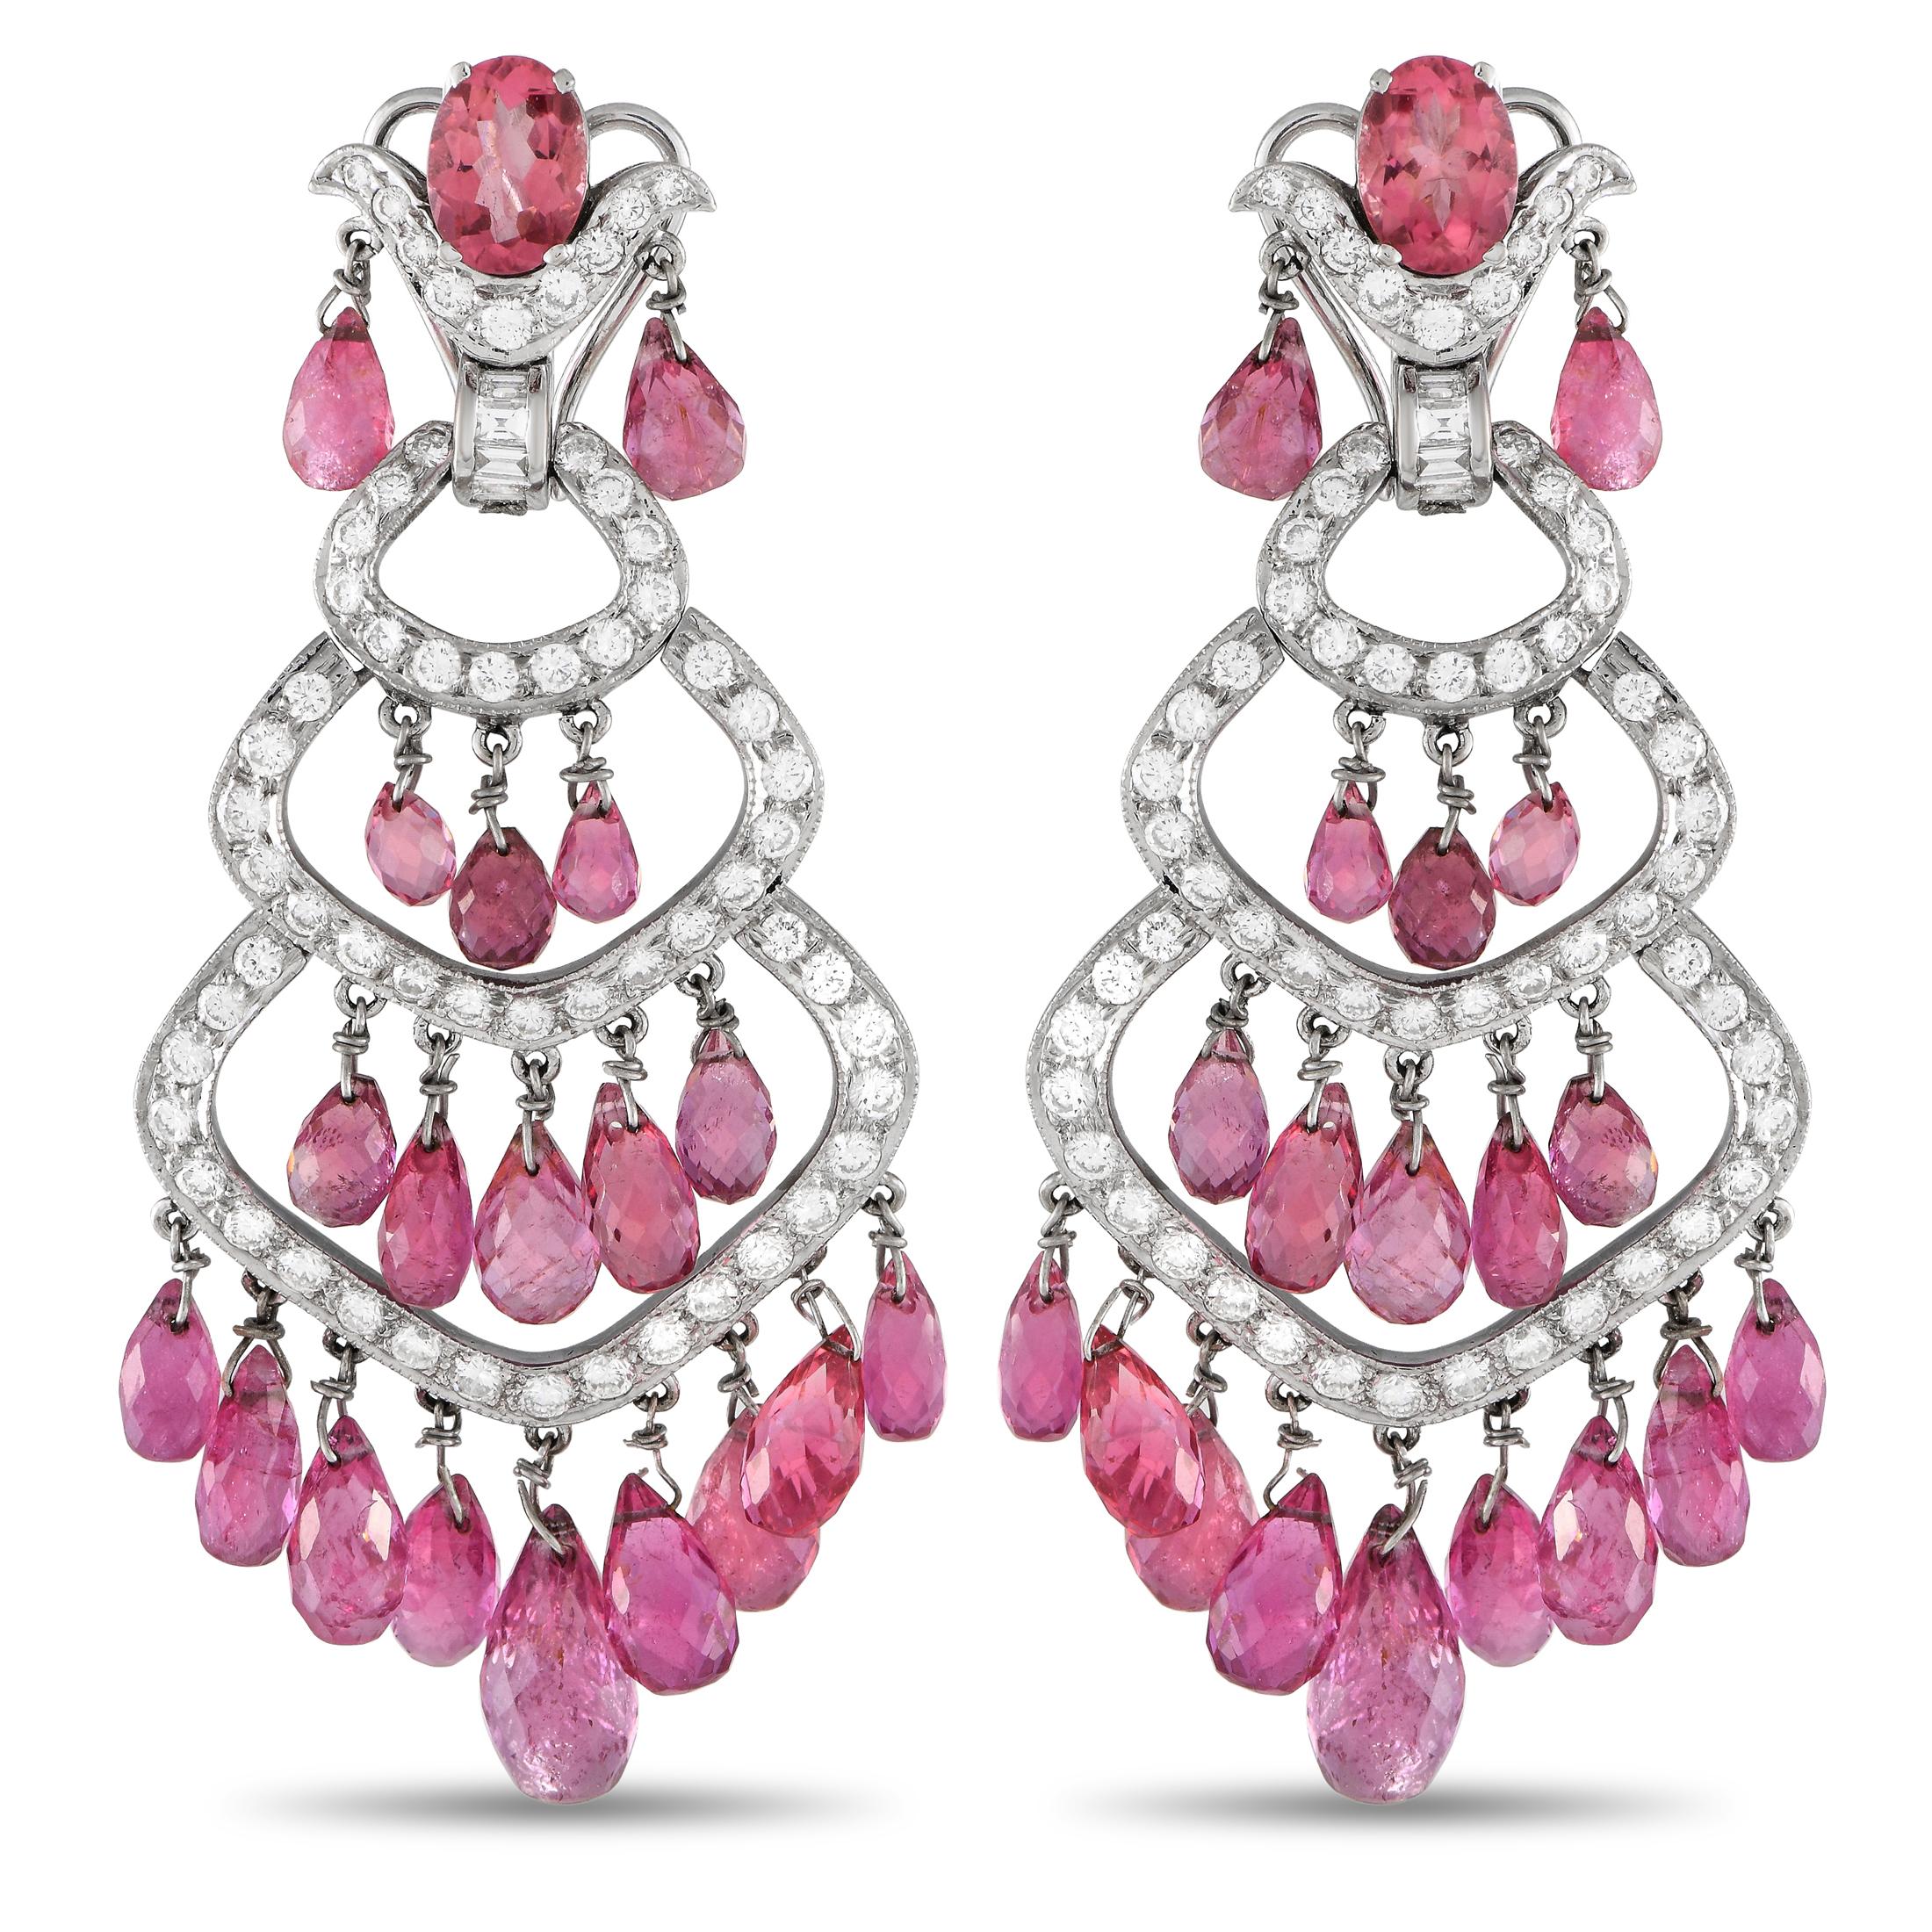 18K White Gold 2.65ct Diamond & Pink Tourmaline Chandelier Earrings MF06-013024 In Excellent Condition For Sale In Southampton, PA